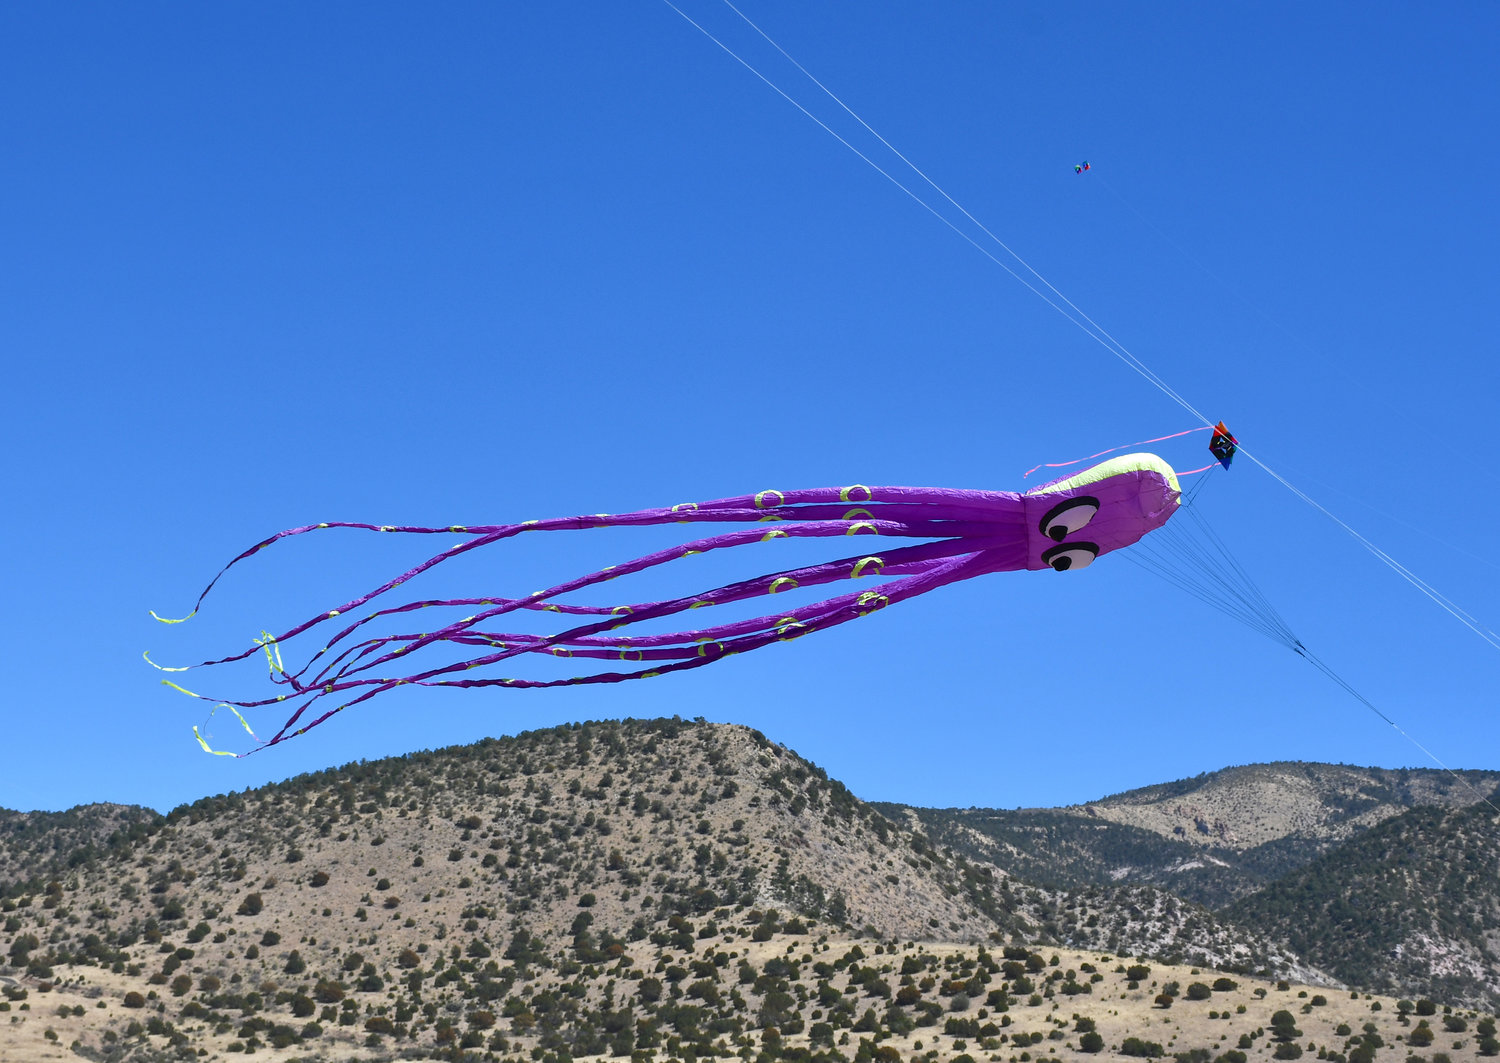 The kites seem to get bigger, longer and better every year.